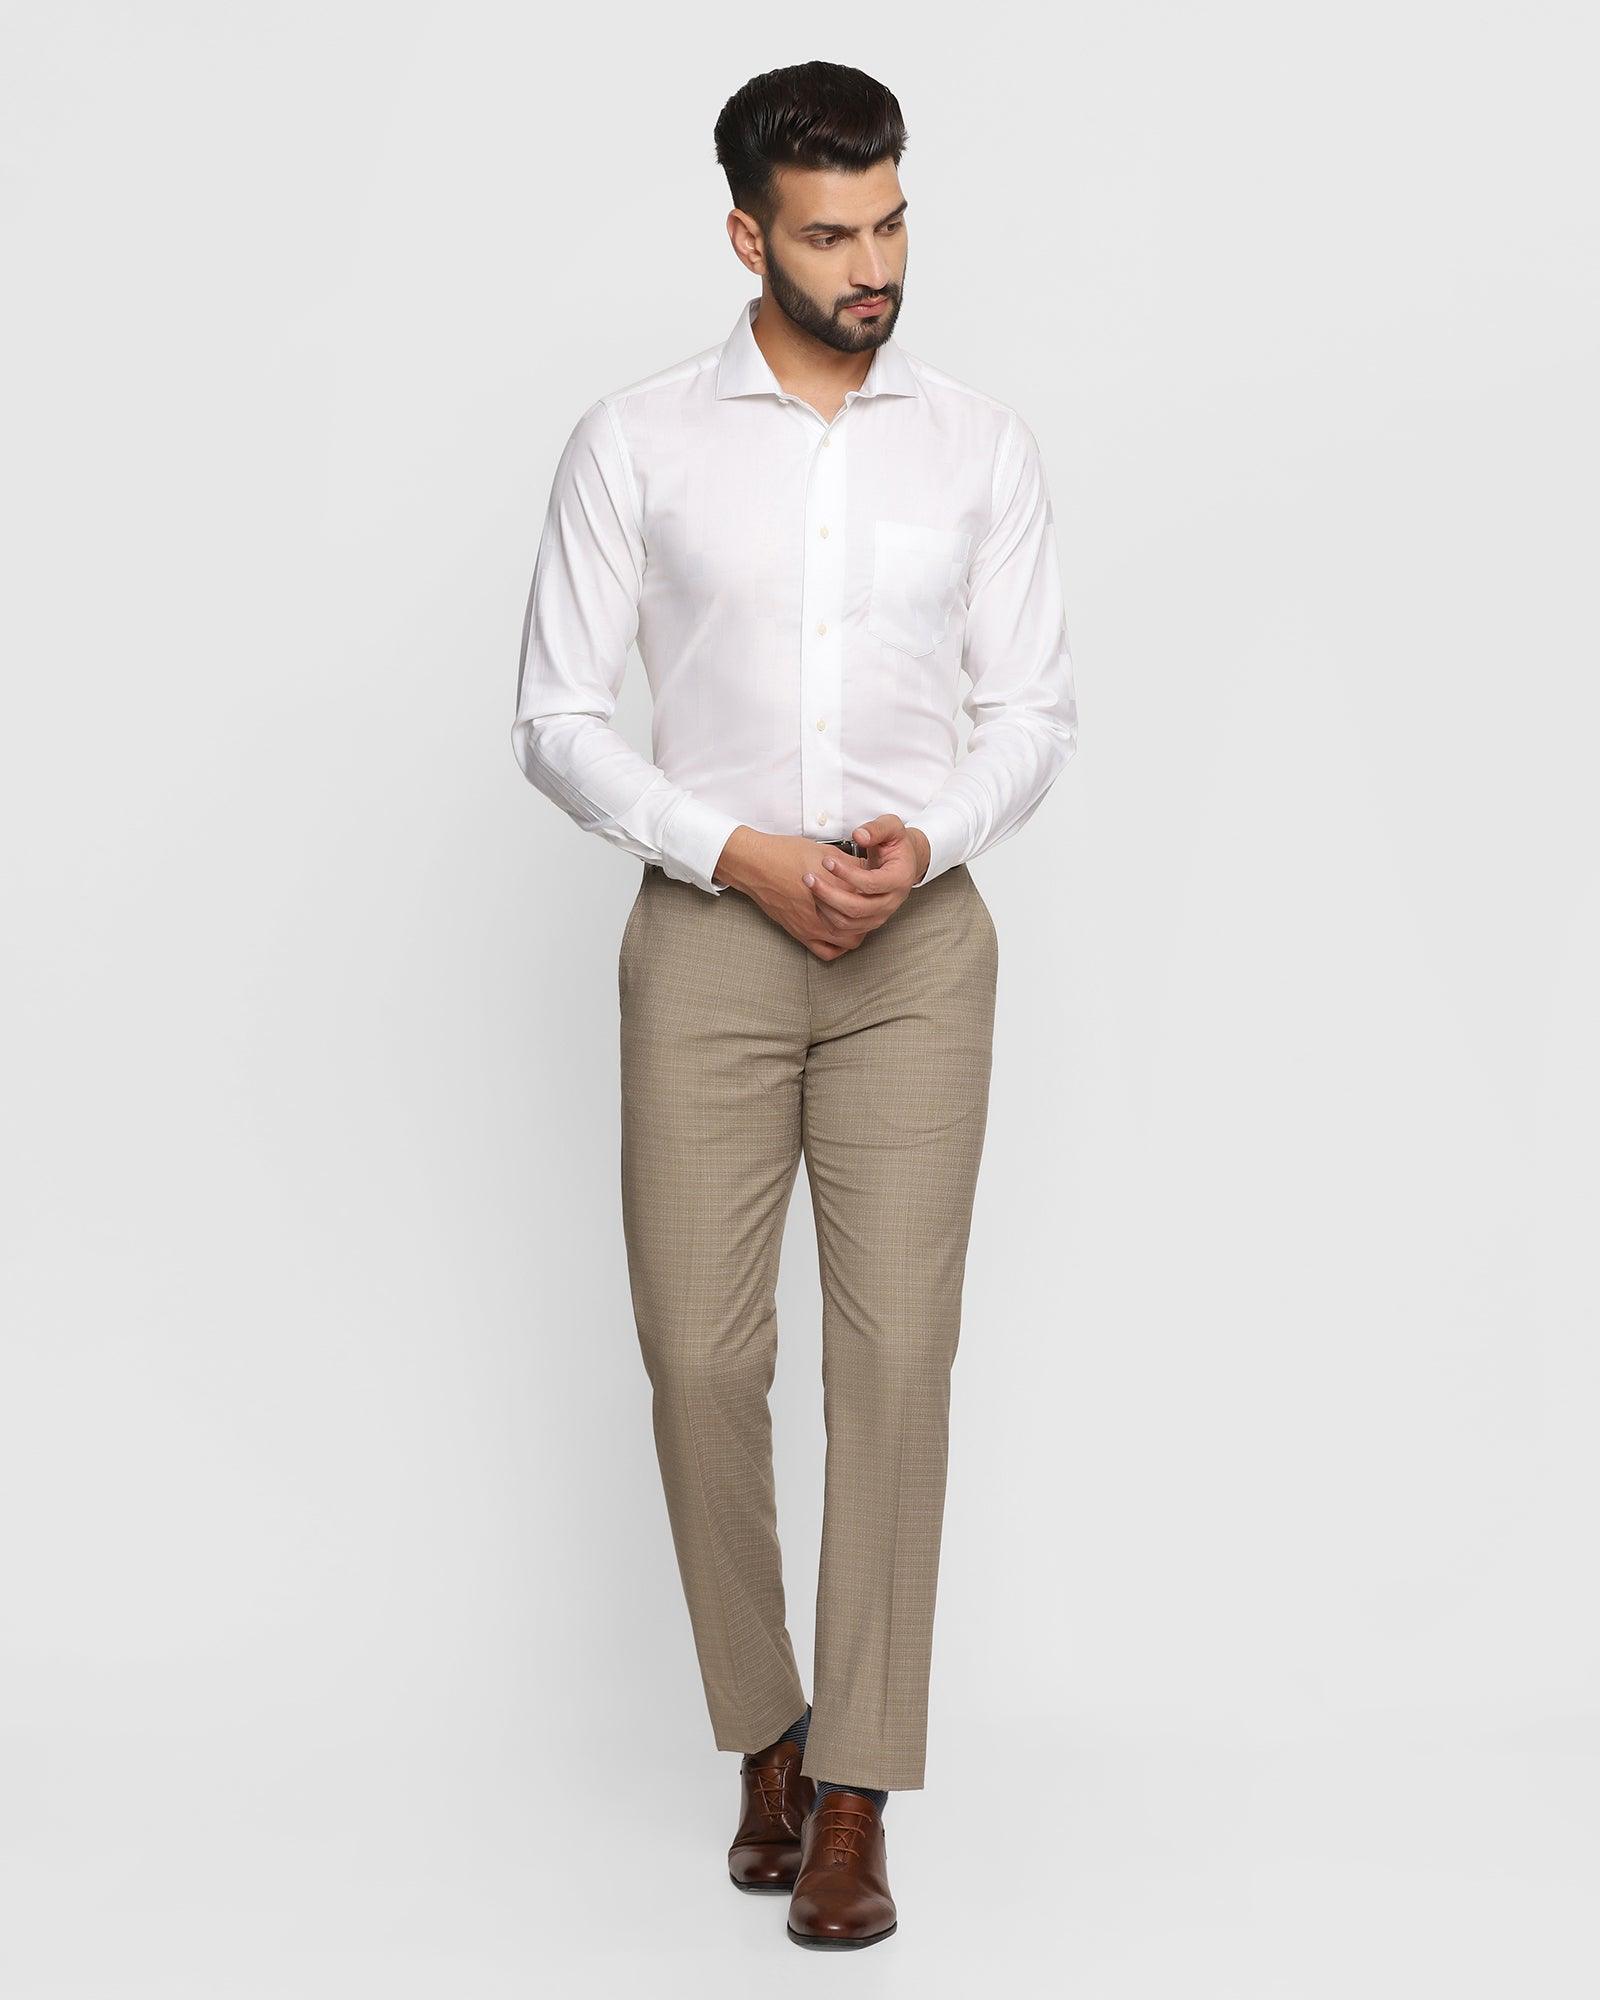 Mens Slim Fit Business Formal Casual Pants Chic Straight Travel Beige  Trousers Mens In Six Colors 2023 Collection From Tonethiny, $22.3 |  DHgate.Com